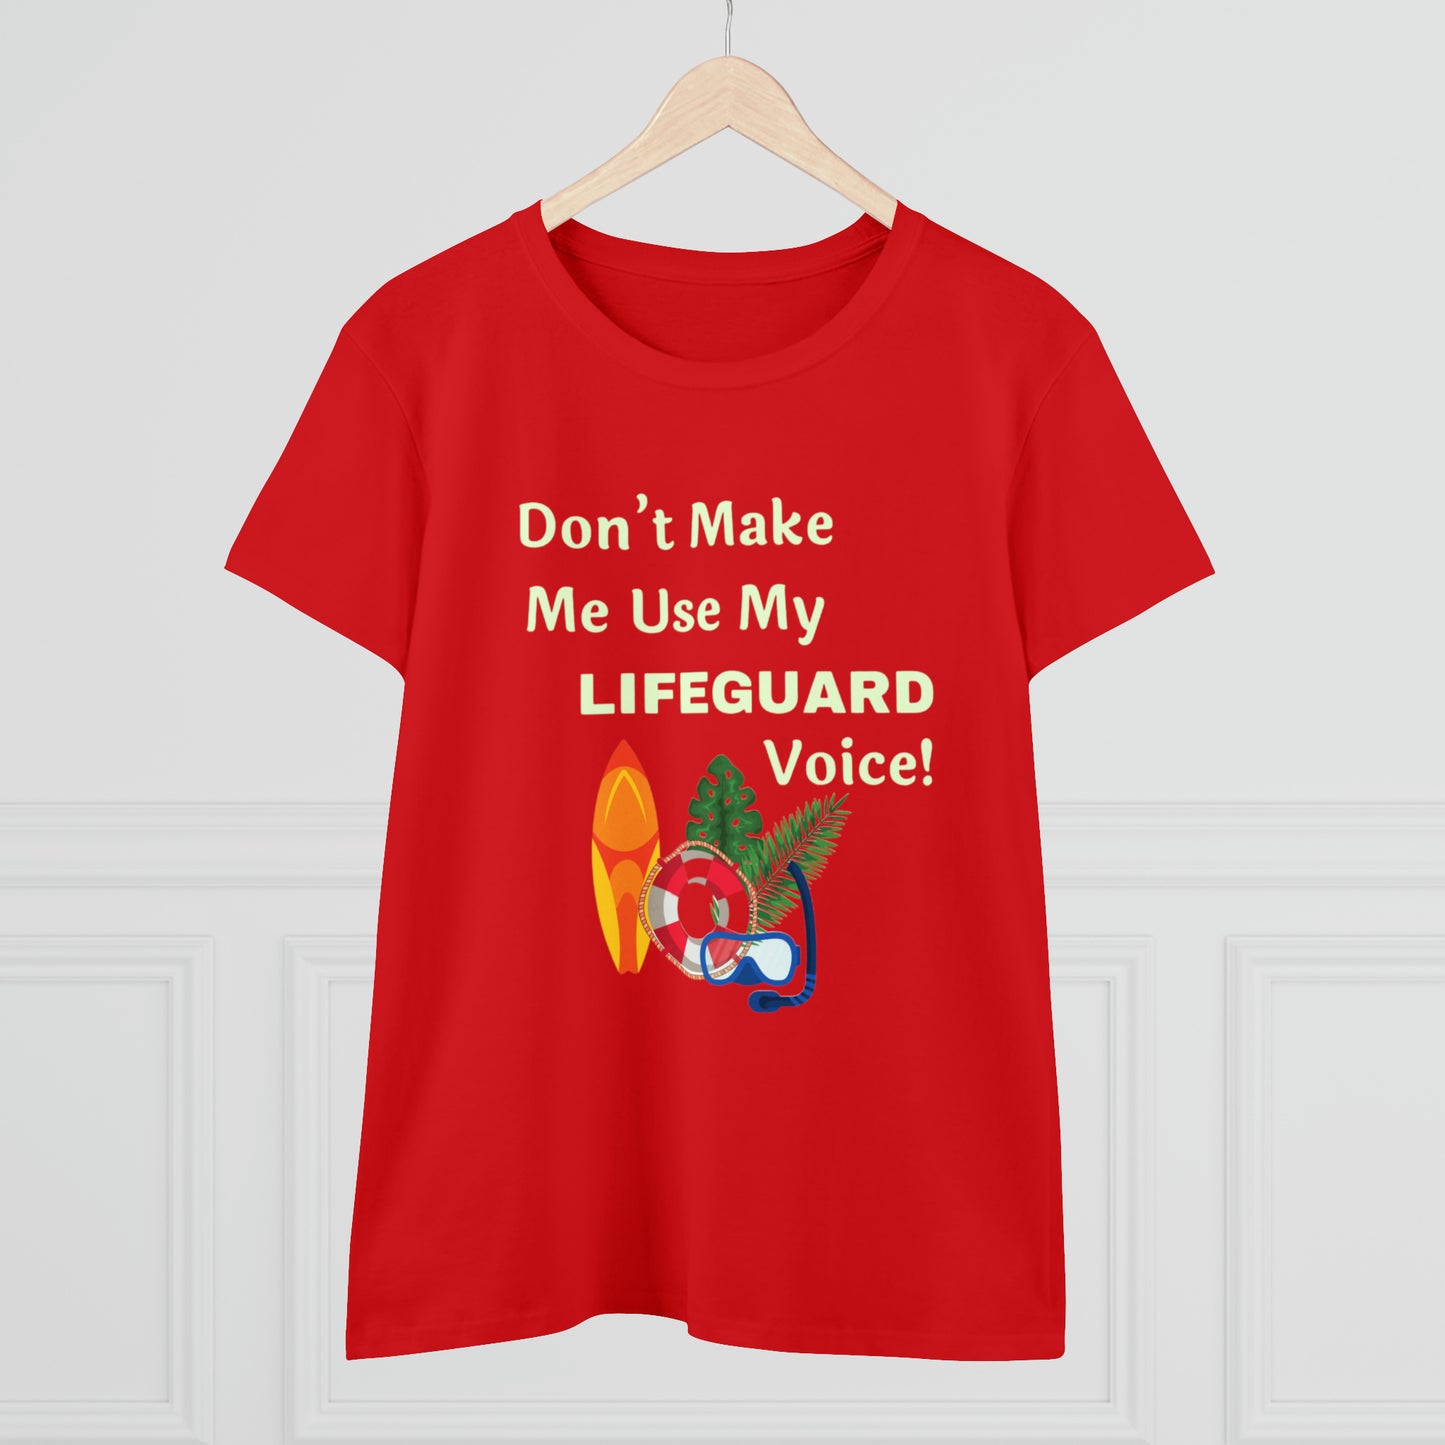 ‘Don’t make me use my lifeguard voice!’ Printed front & Back. Women's Midweight Cotton Tee